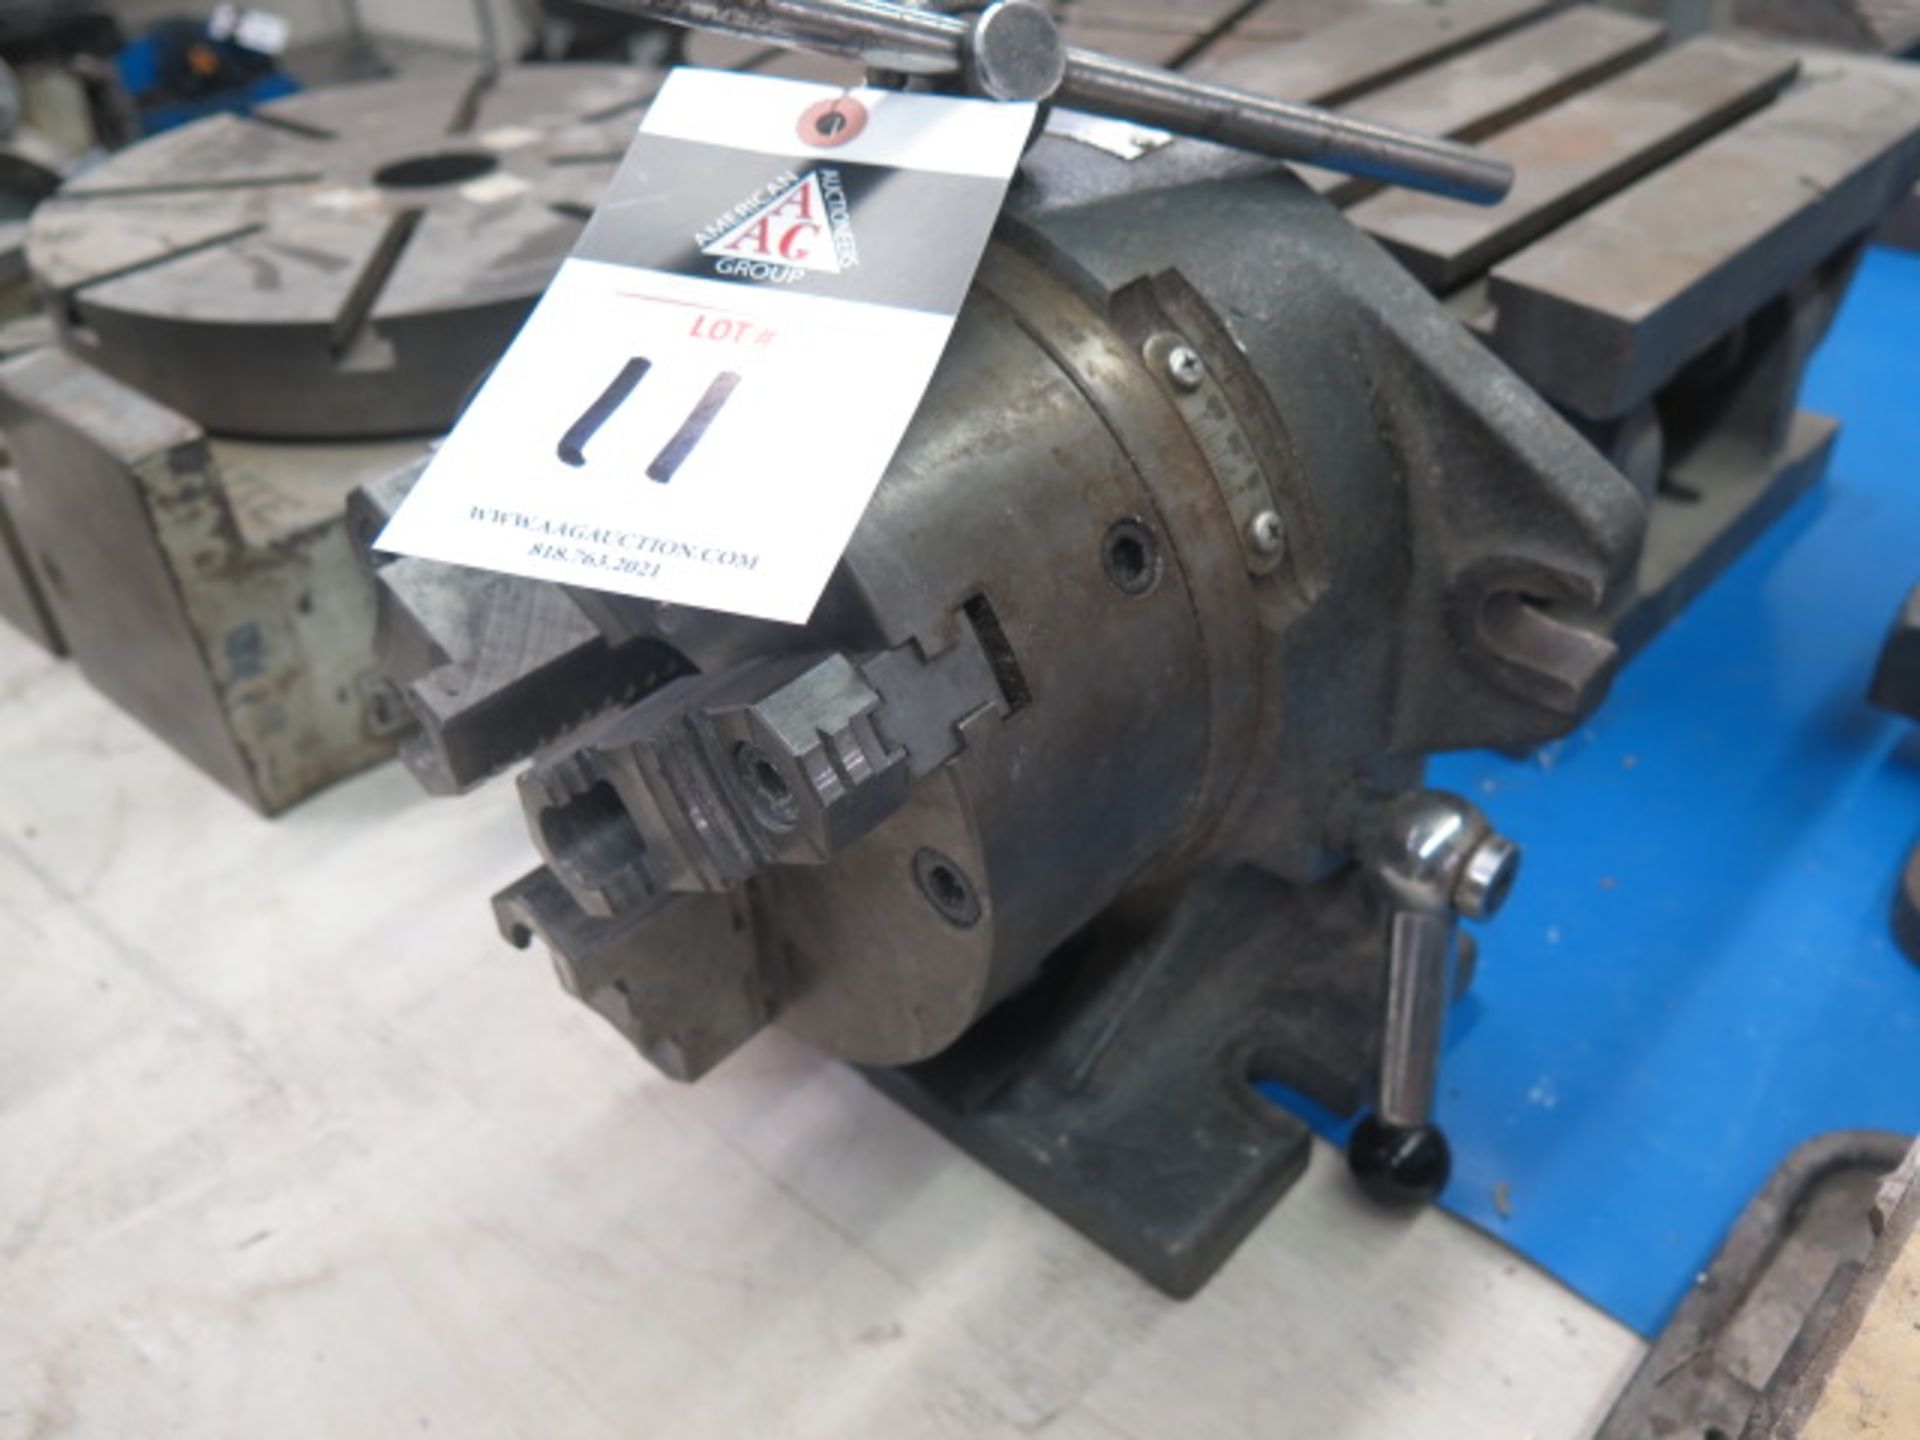 Yuasa 6 1/2" 3-Jaw Indexing Chuck (SOLD AS-IS - NO WARRANTY) - Image 2 of 5